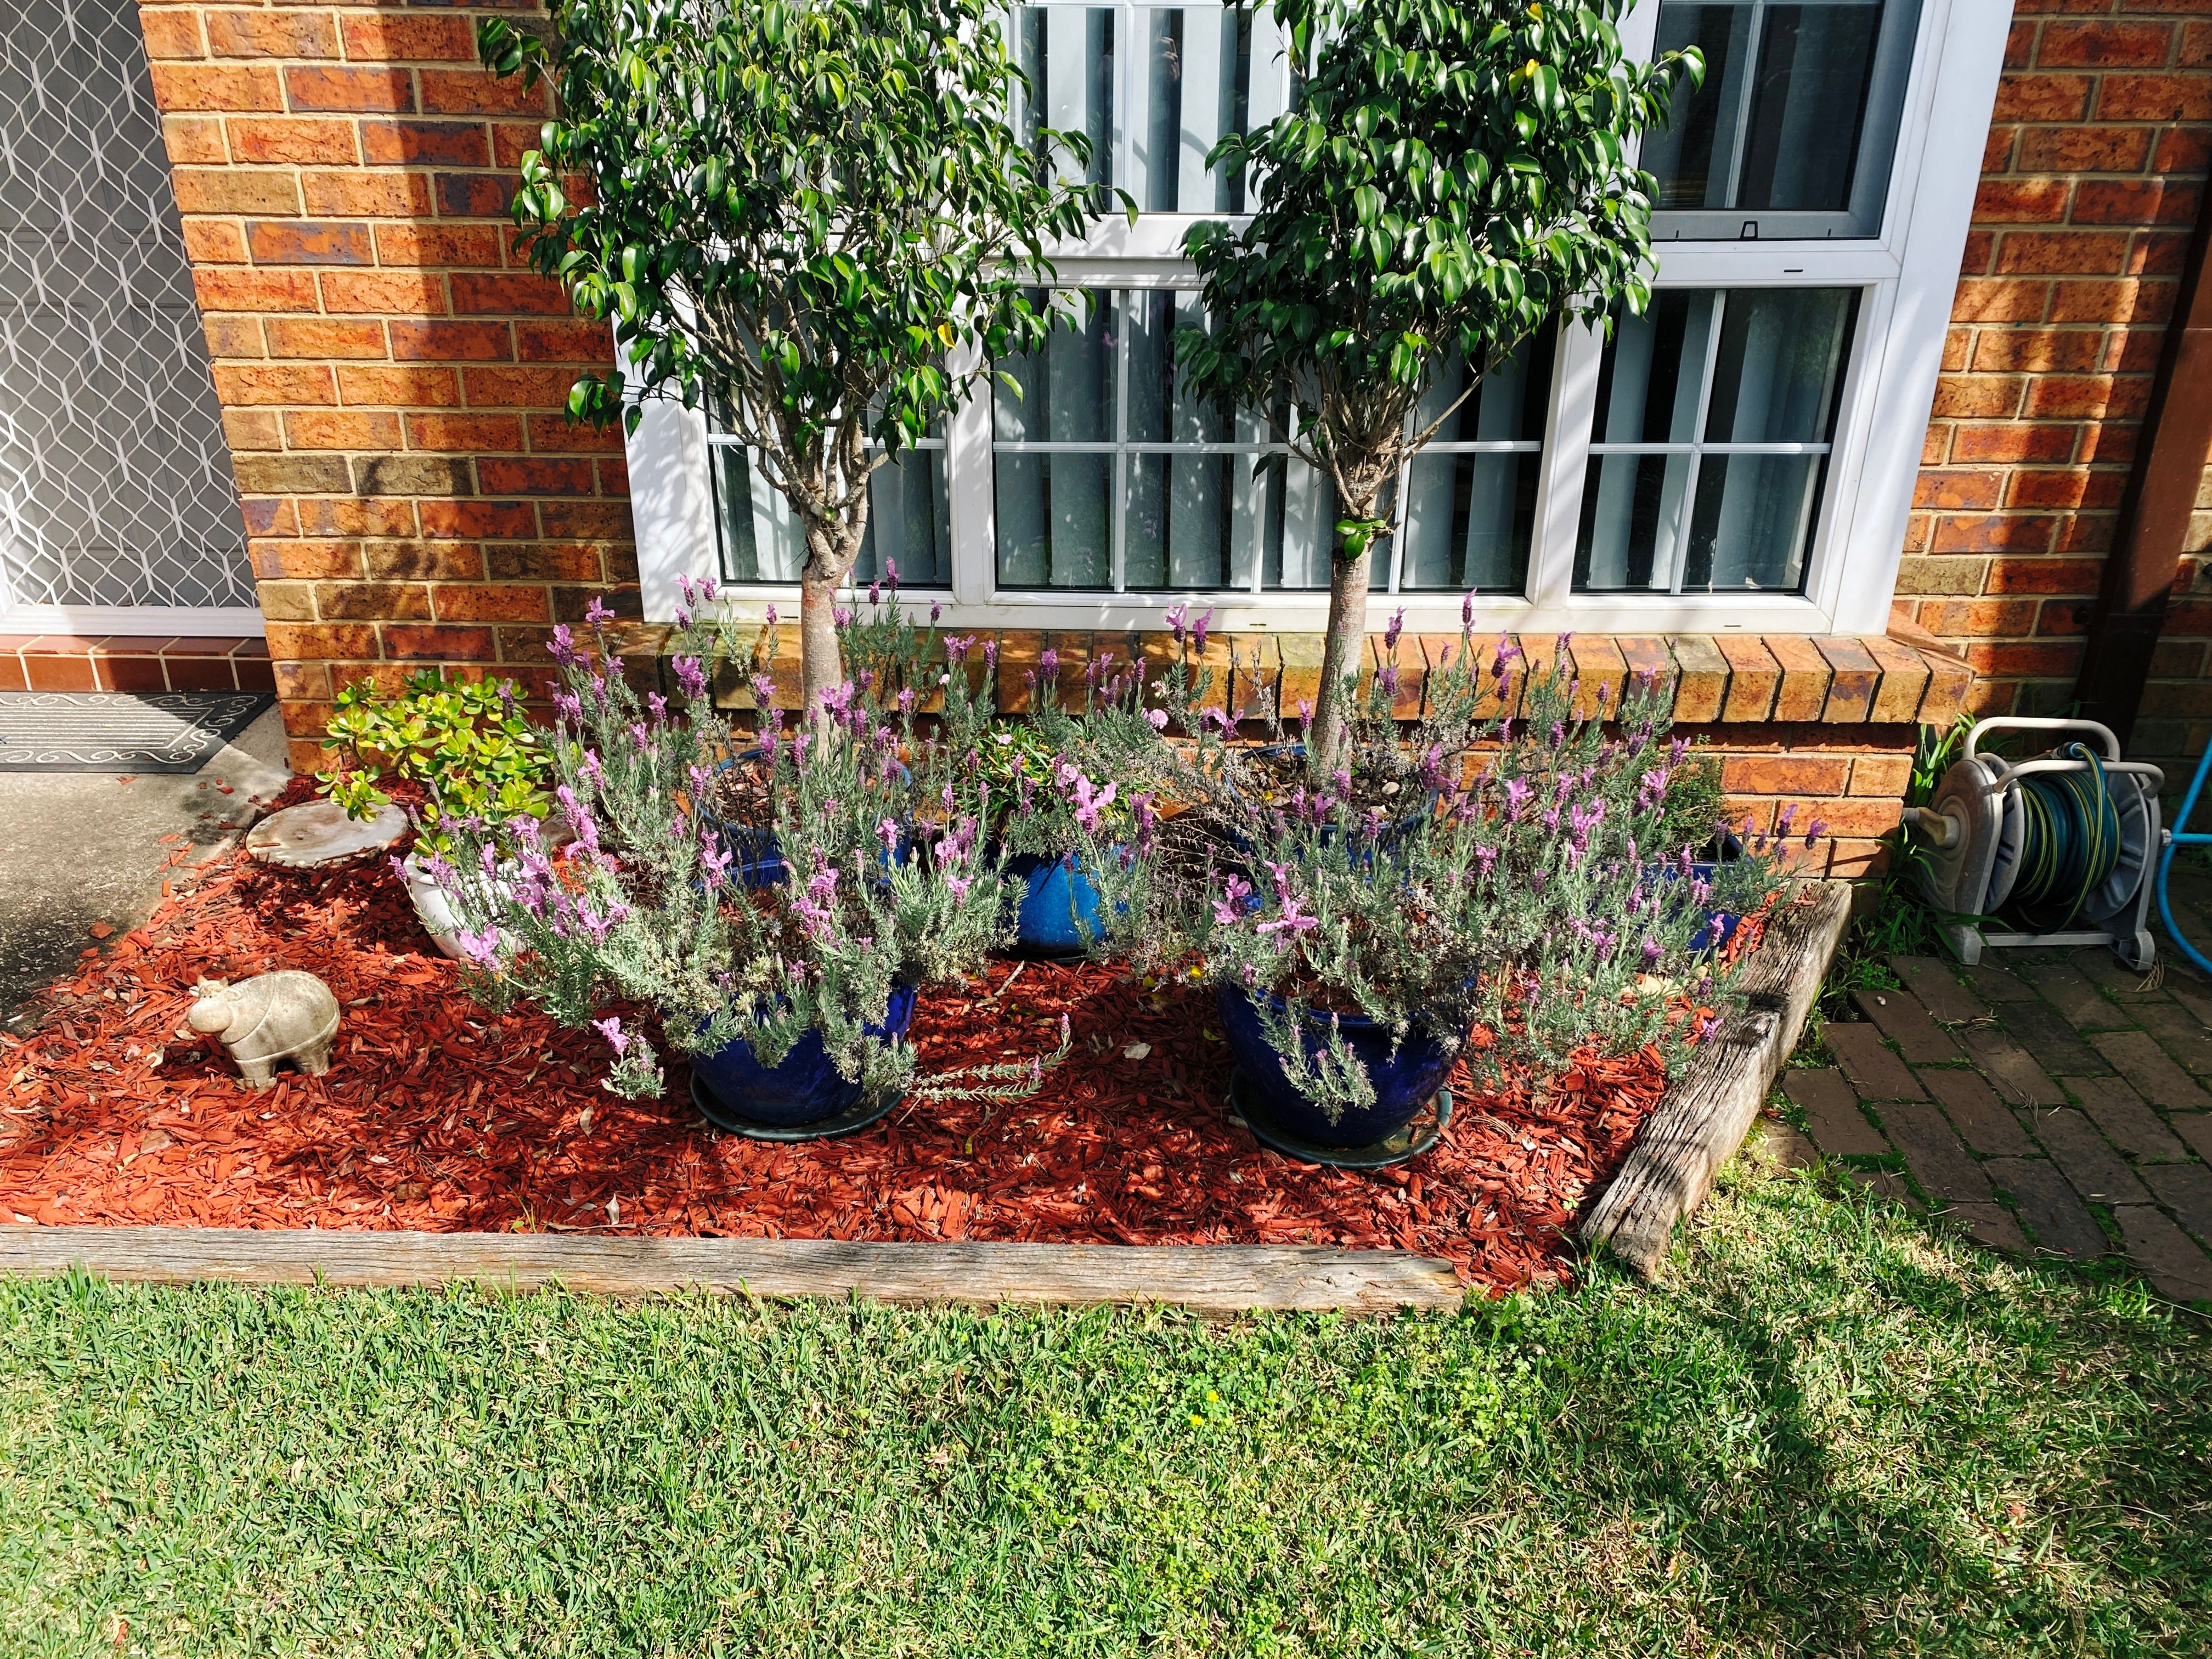 A photo of a little garden in front of a bay window. The whole "garden" maybe 1.5 metres wide and covered in red mulch, and at the front are two very lavender plants busily blooming with flowers.